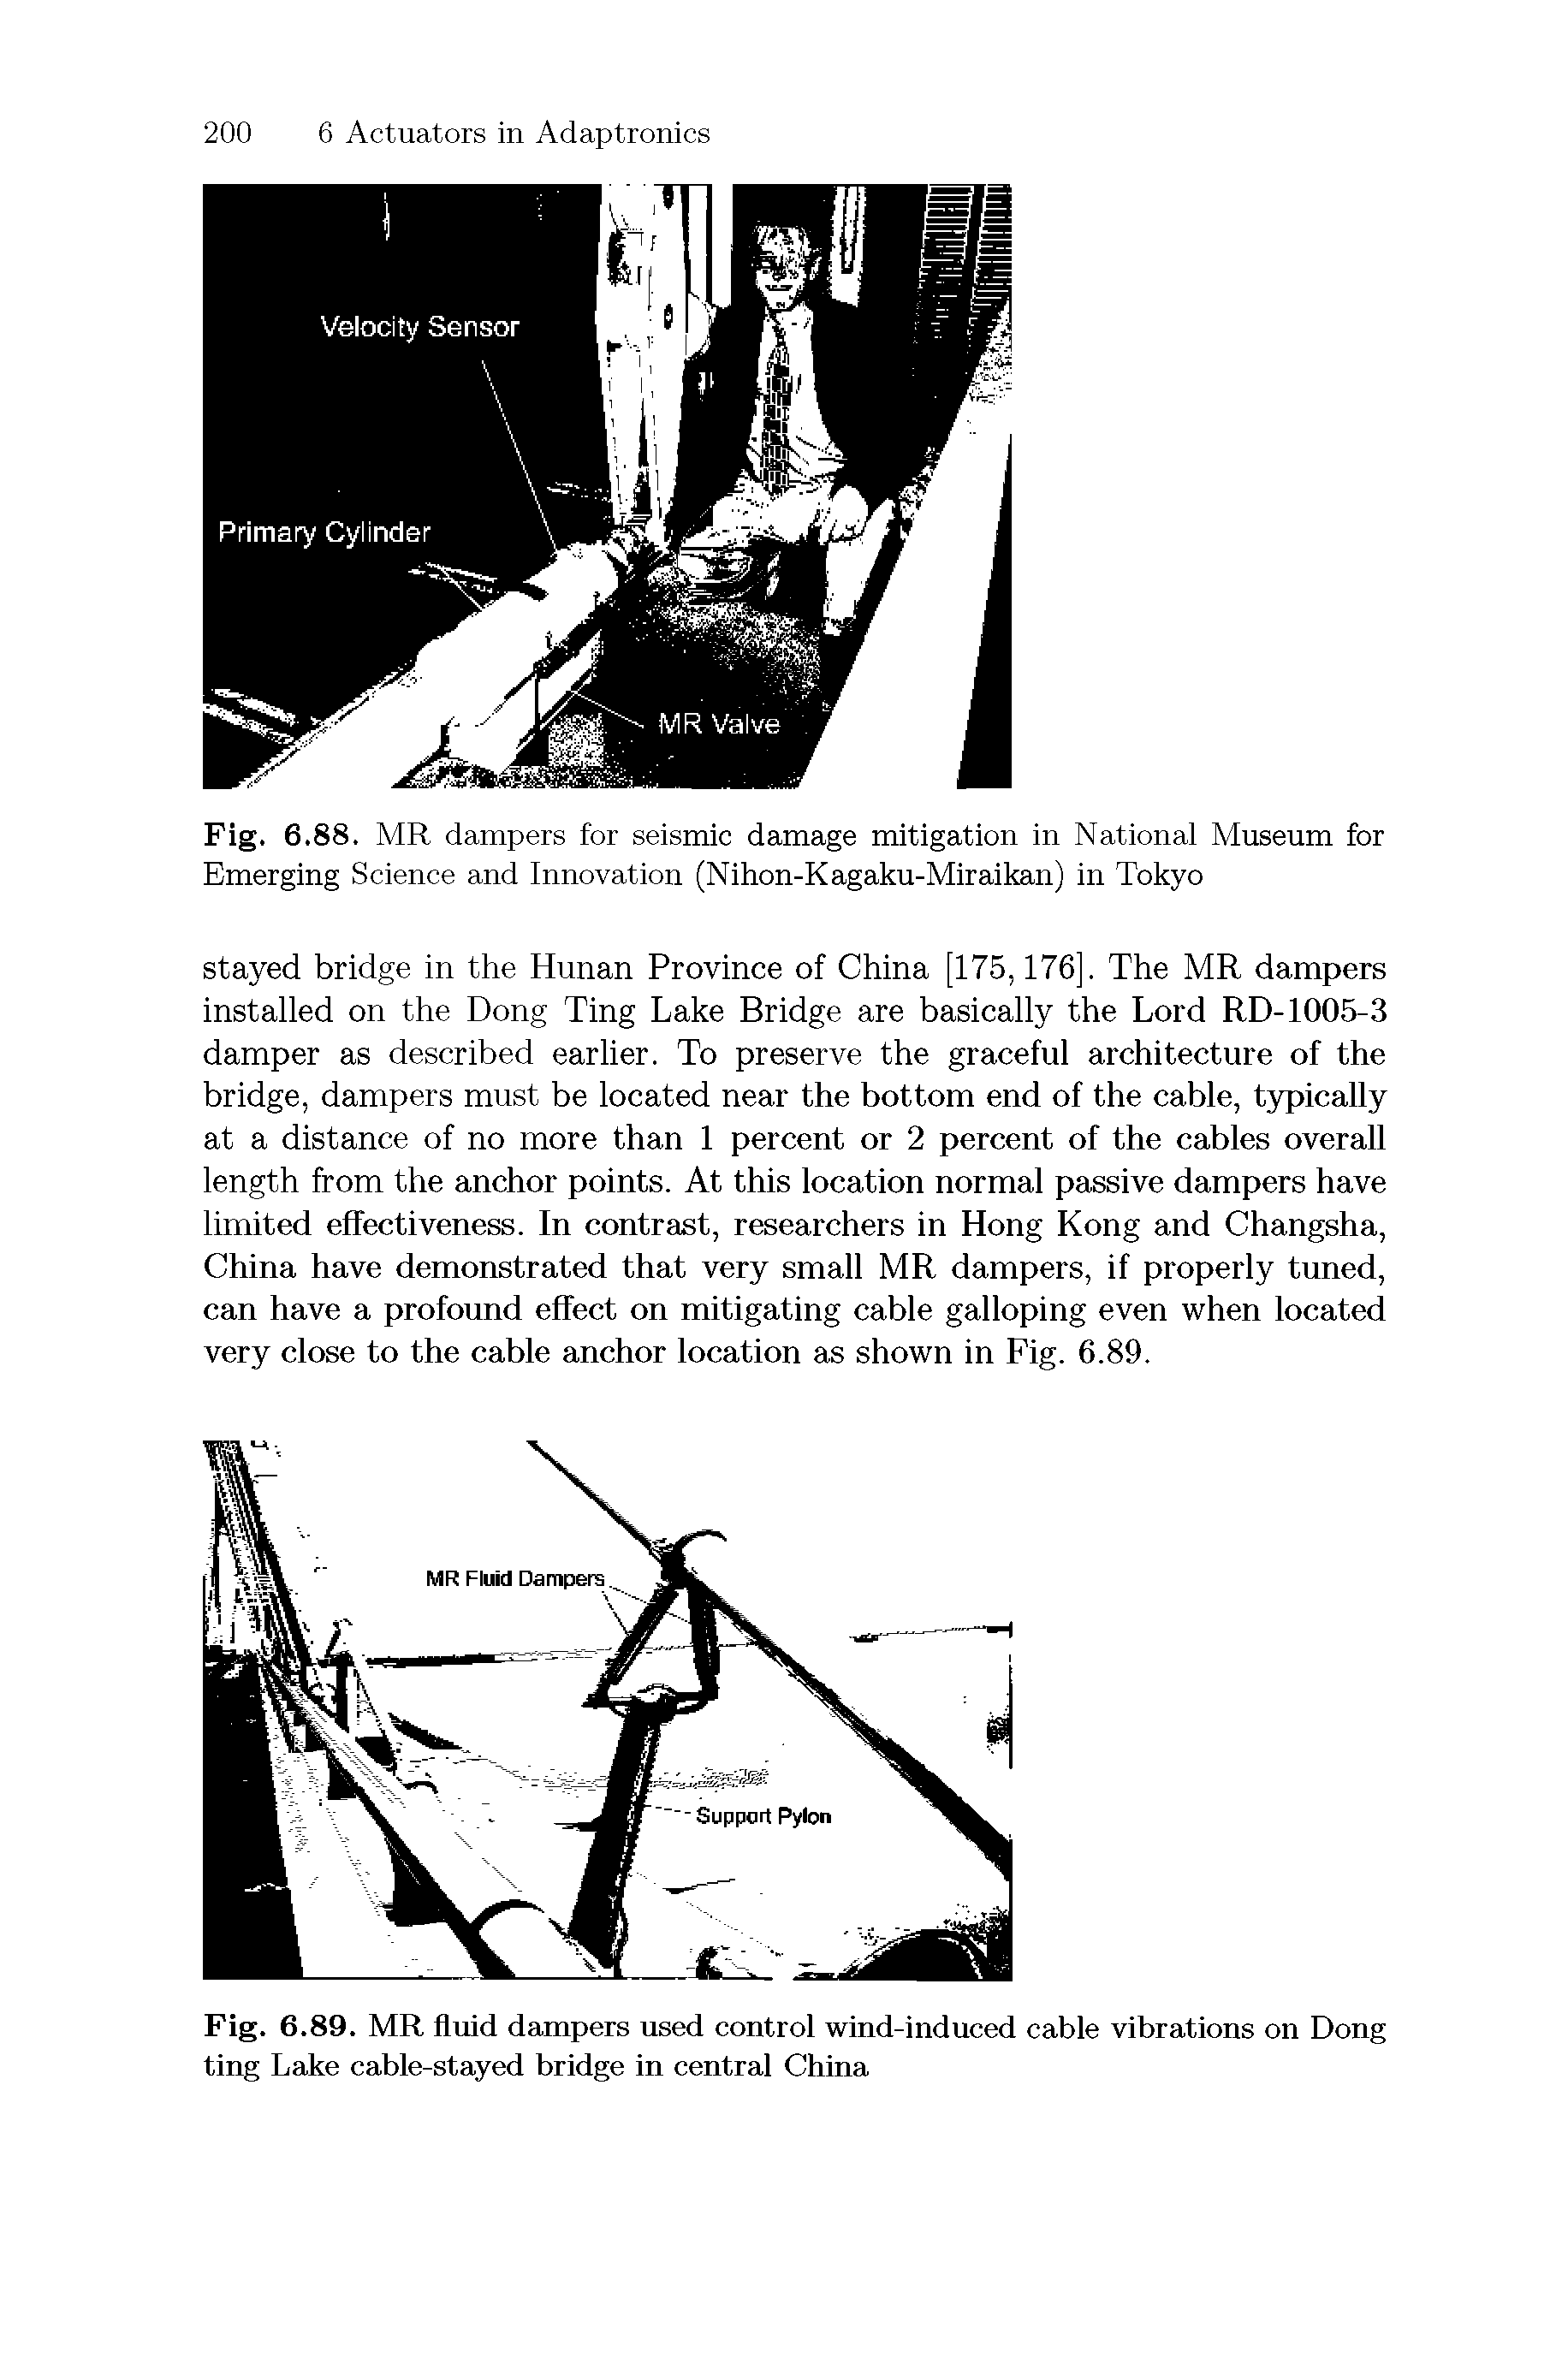 Fig. 6.89. MR fluid dampers used control wind-induced cable vibrations on Dong ting Lake cable-stayed bridge in central China...